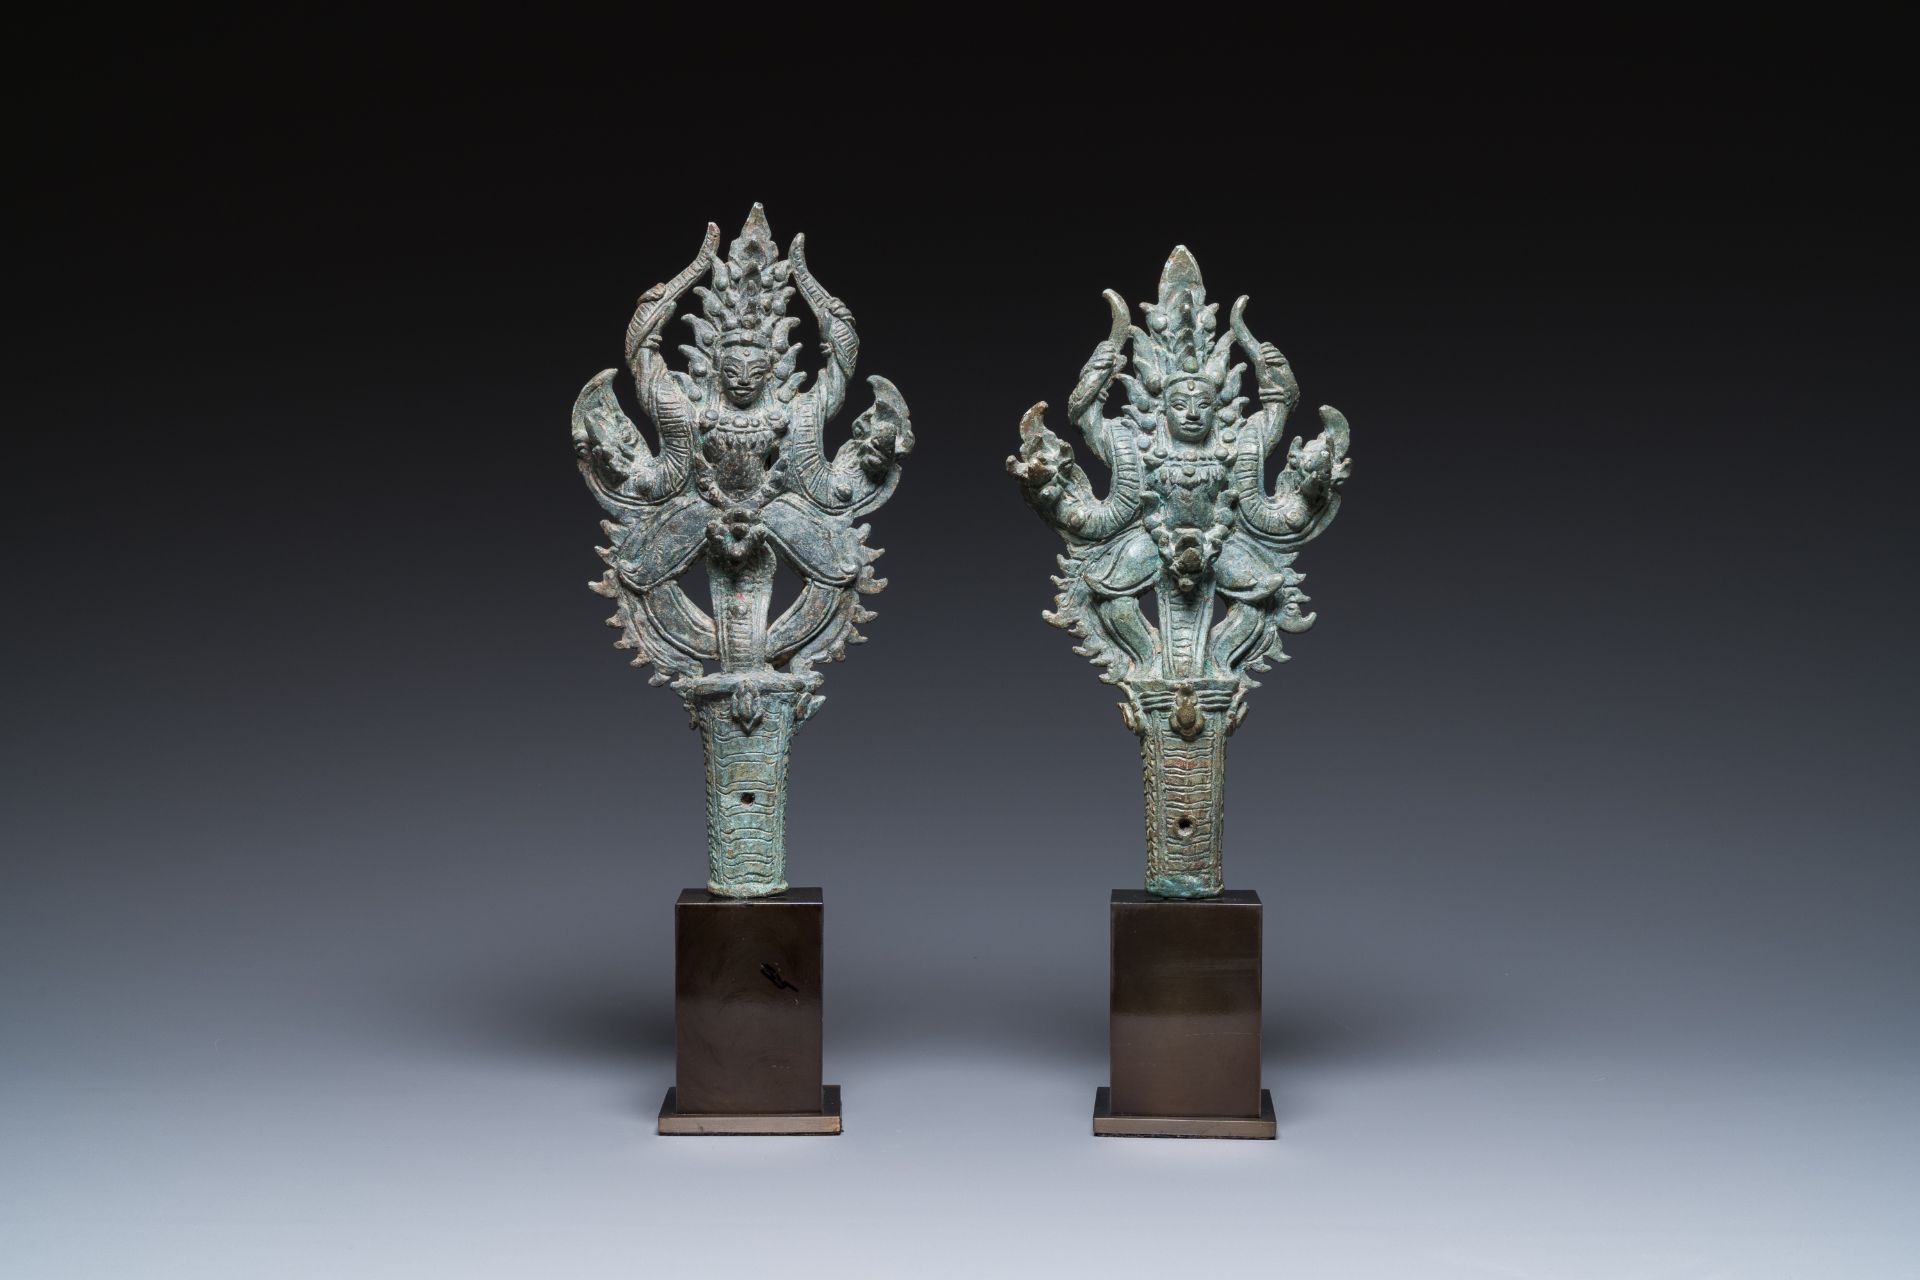 A pair of Khmer bronze ornaments showing dancing Apsaras in Bayon-style, Cambodia, Angkor period, 13